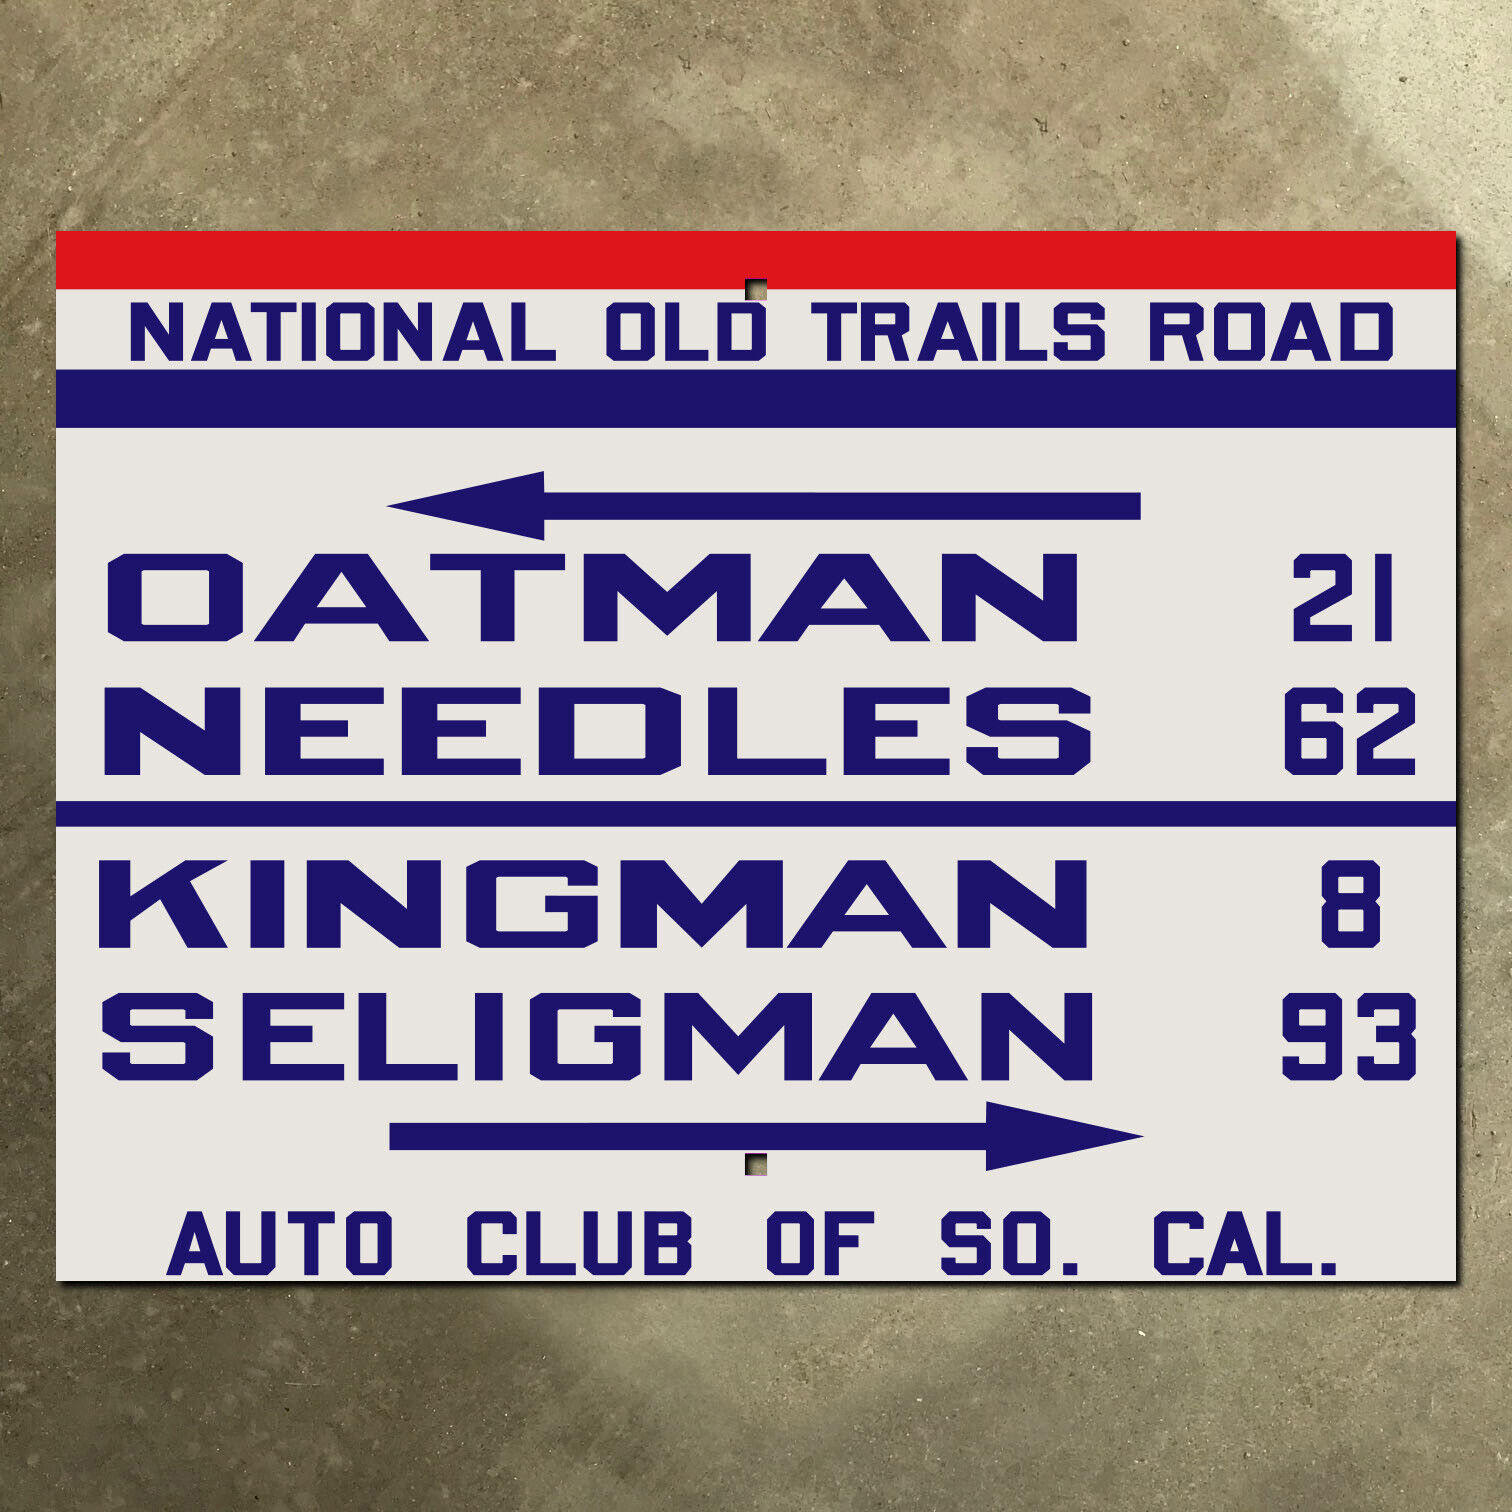 ACSC National Old Trails Road highway sign route 66 Oatman Arizona 1922 20x15